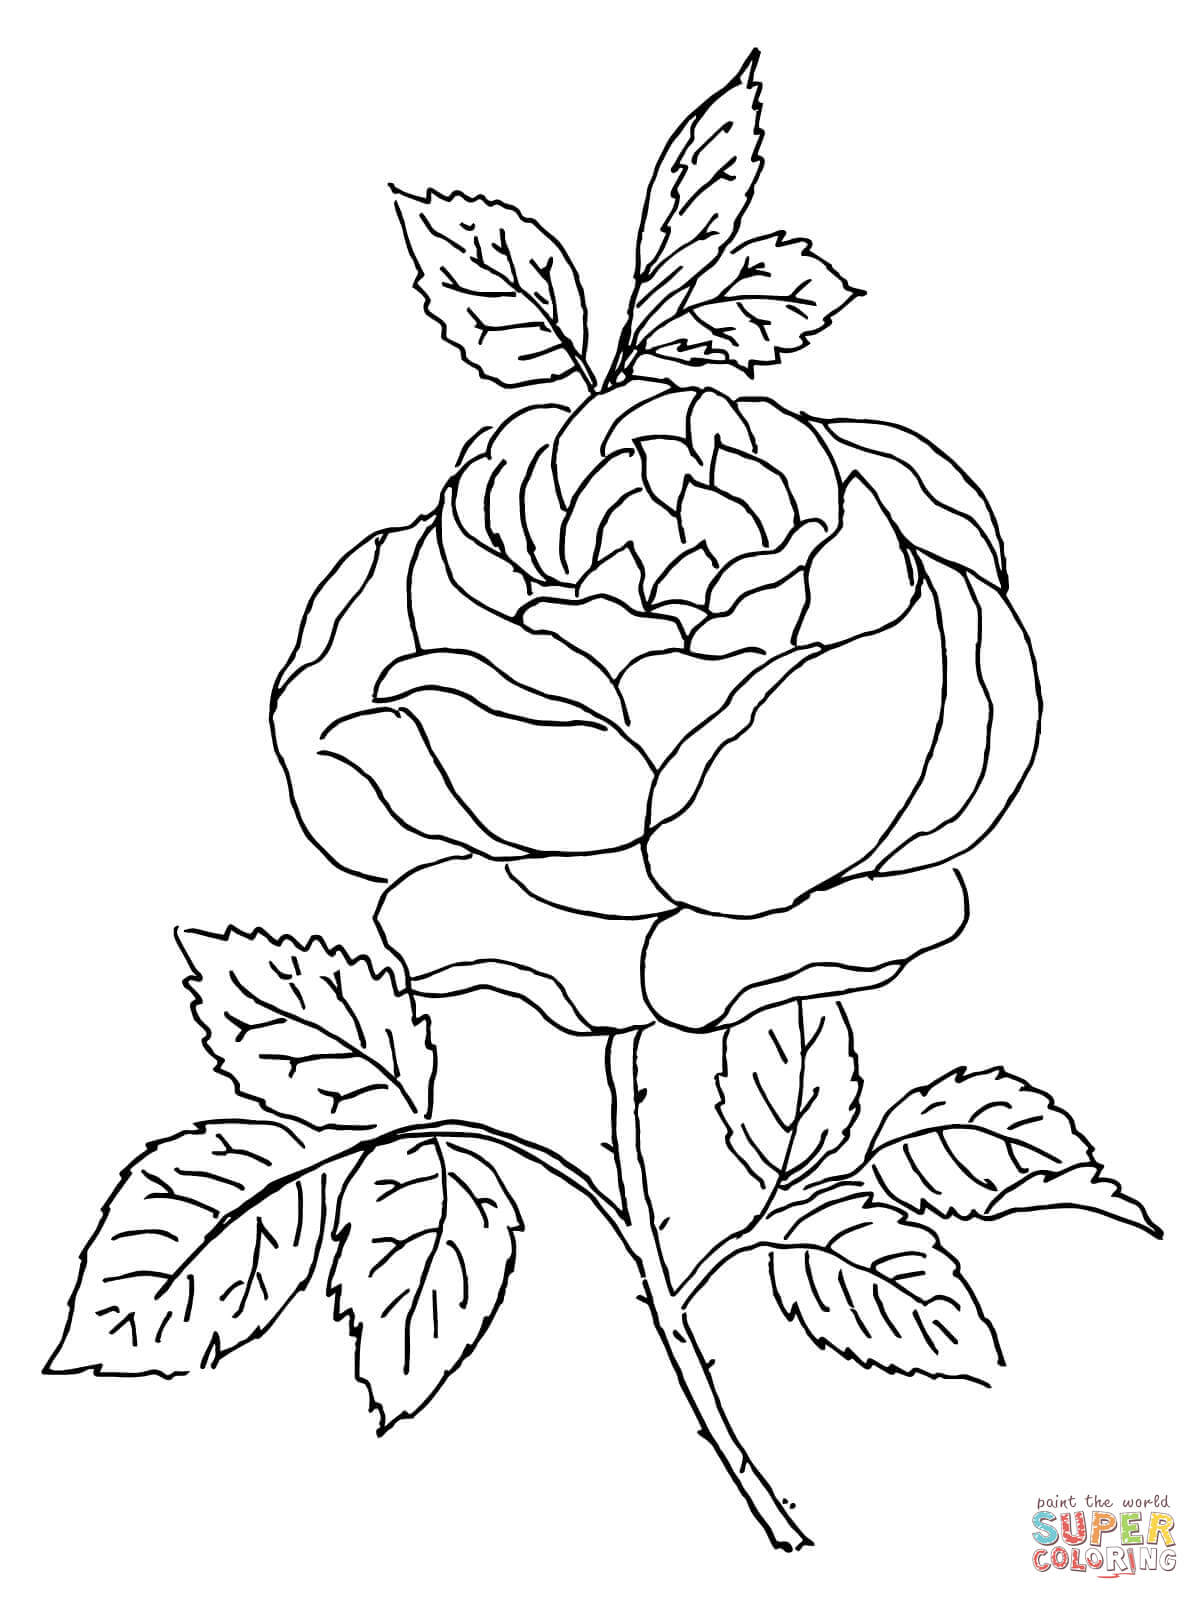 Rose Blossom Coloring Page